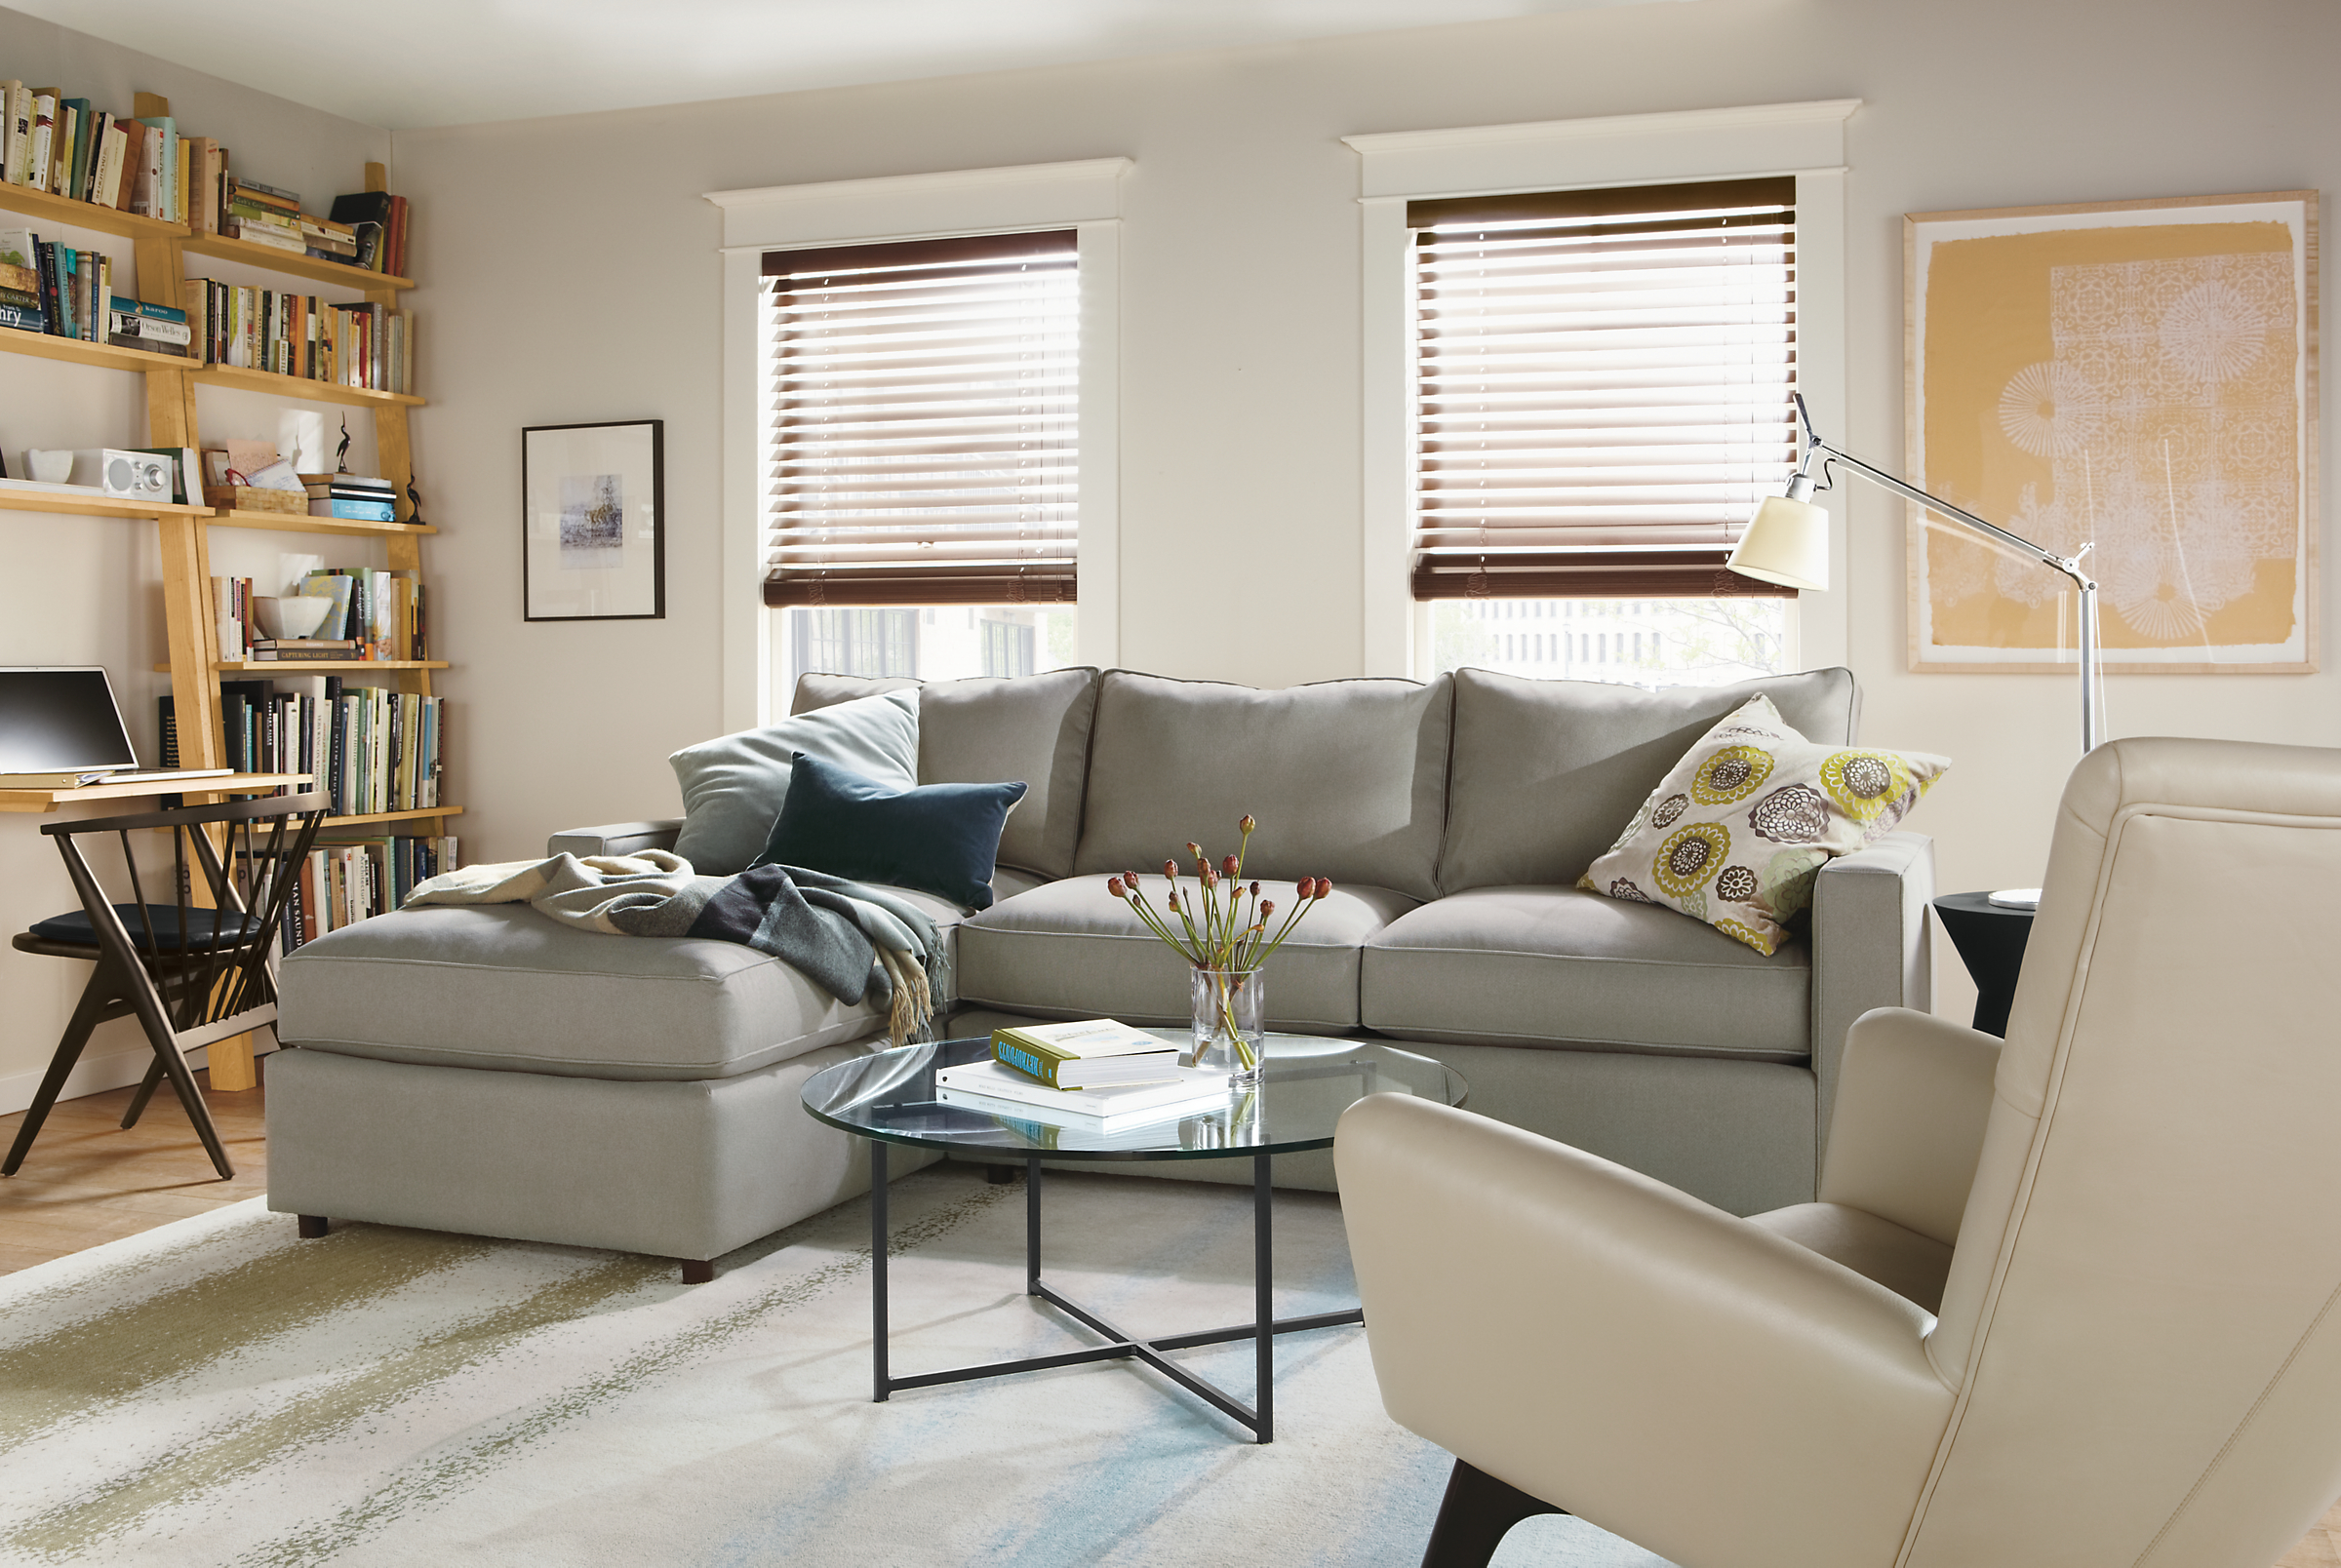 Detail of York sofa with left arm chaise in dawson cement fabric in living room.